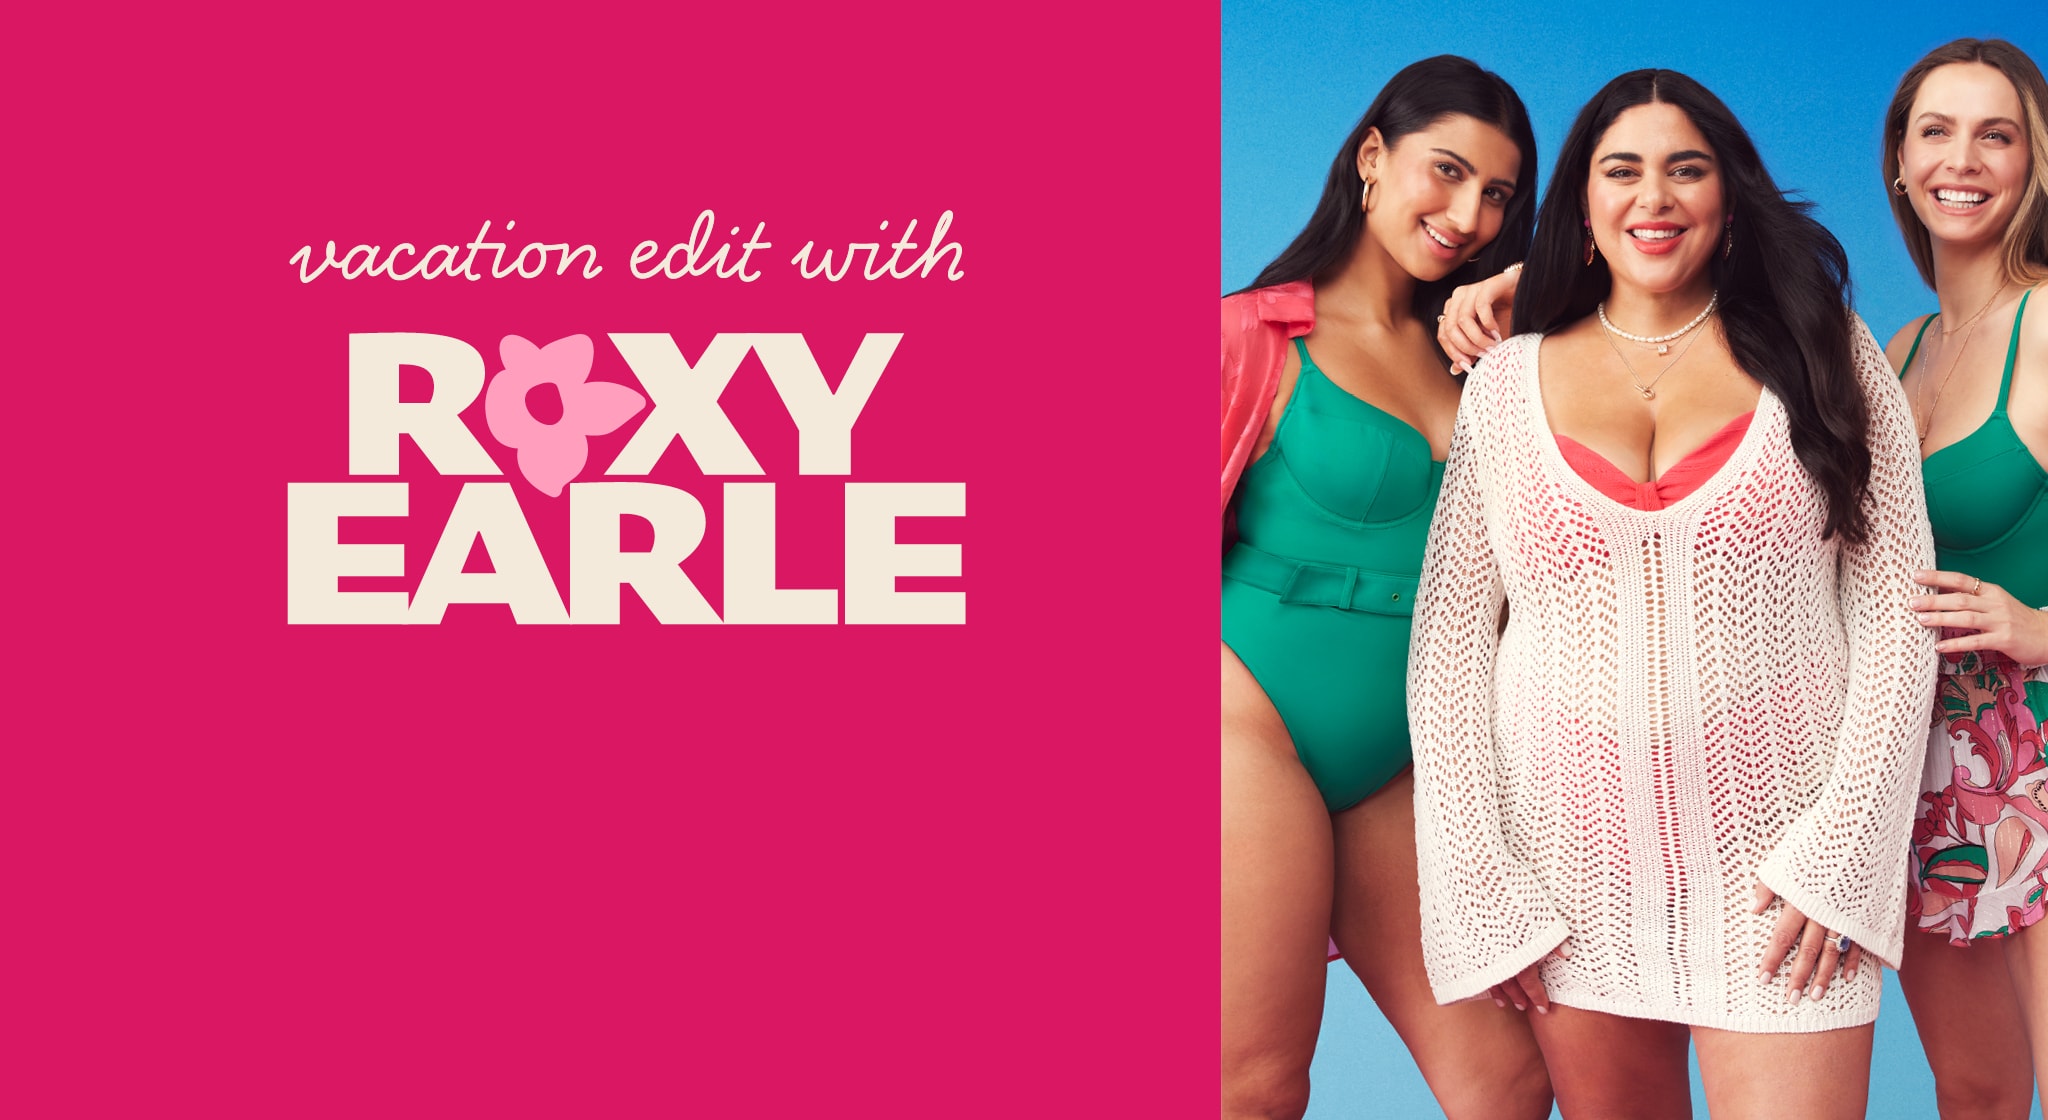 Knix Teamed Up With Roxy Earle To Launch New Swimwear Line